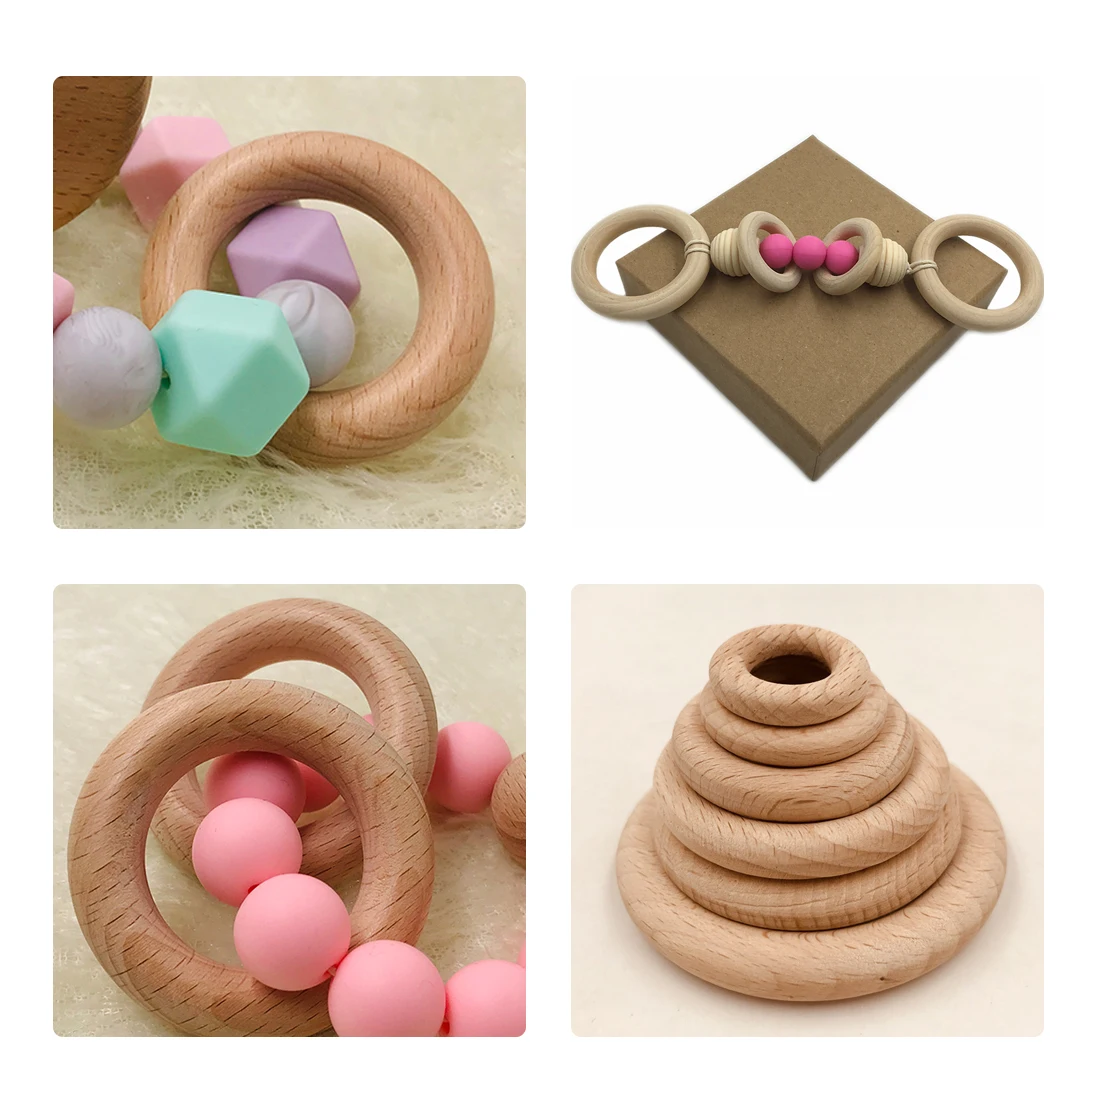 25mm-68mm Natural Wooden Baby Teething Rings Infant Teether Toy Necklace Bracelet For 3-12 Month Infants Tooth Care Products